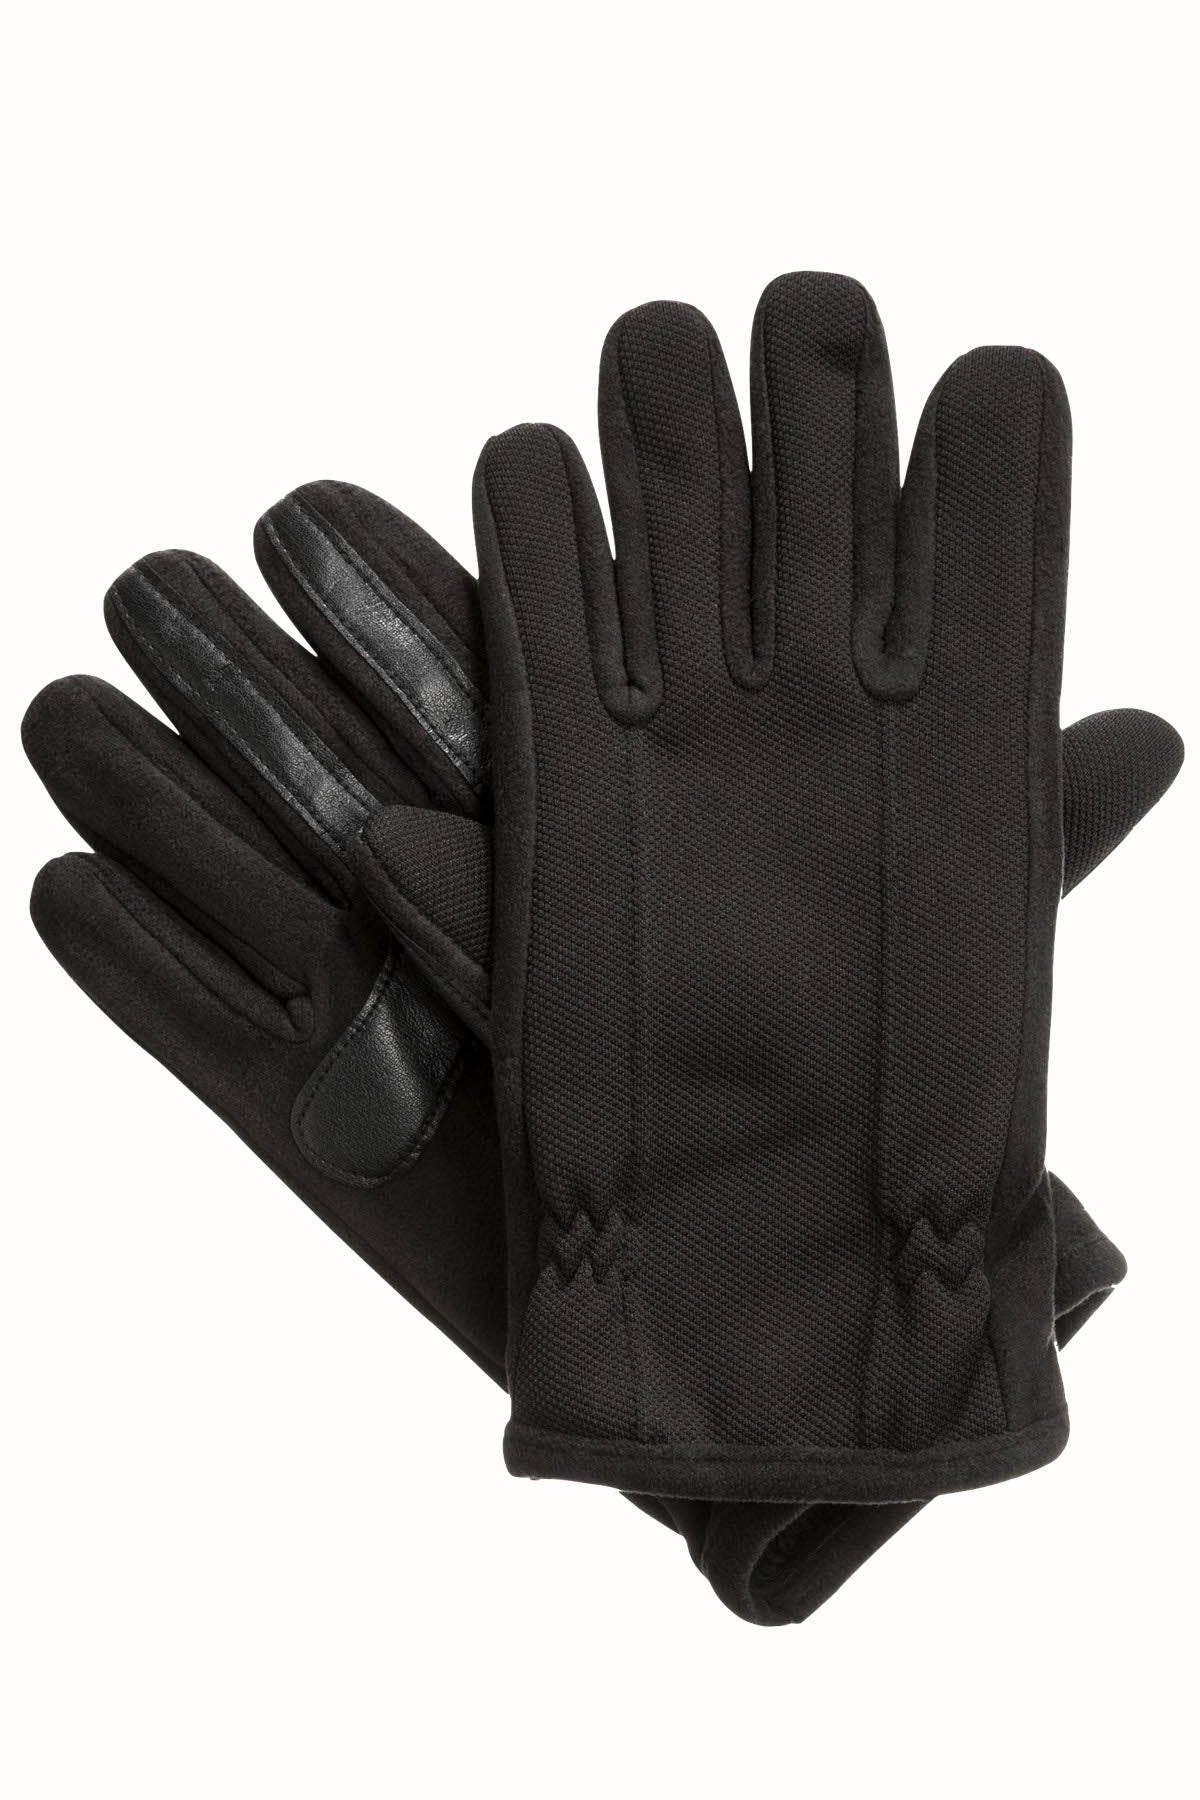 Isotoner Signature Black THERMAflex™ SmarTouch Tech Stretch Gloves